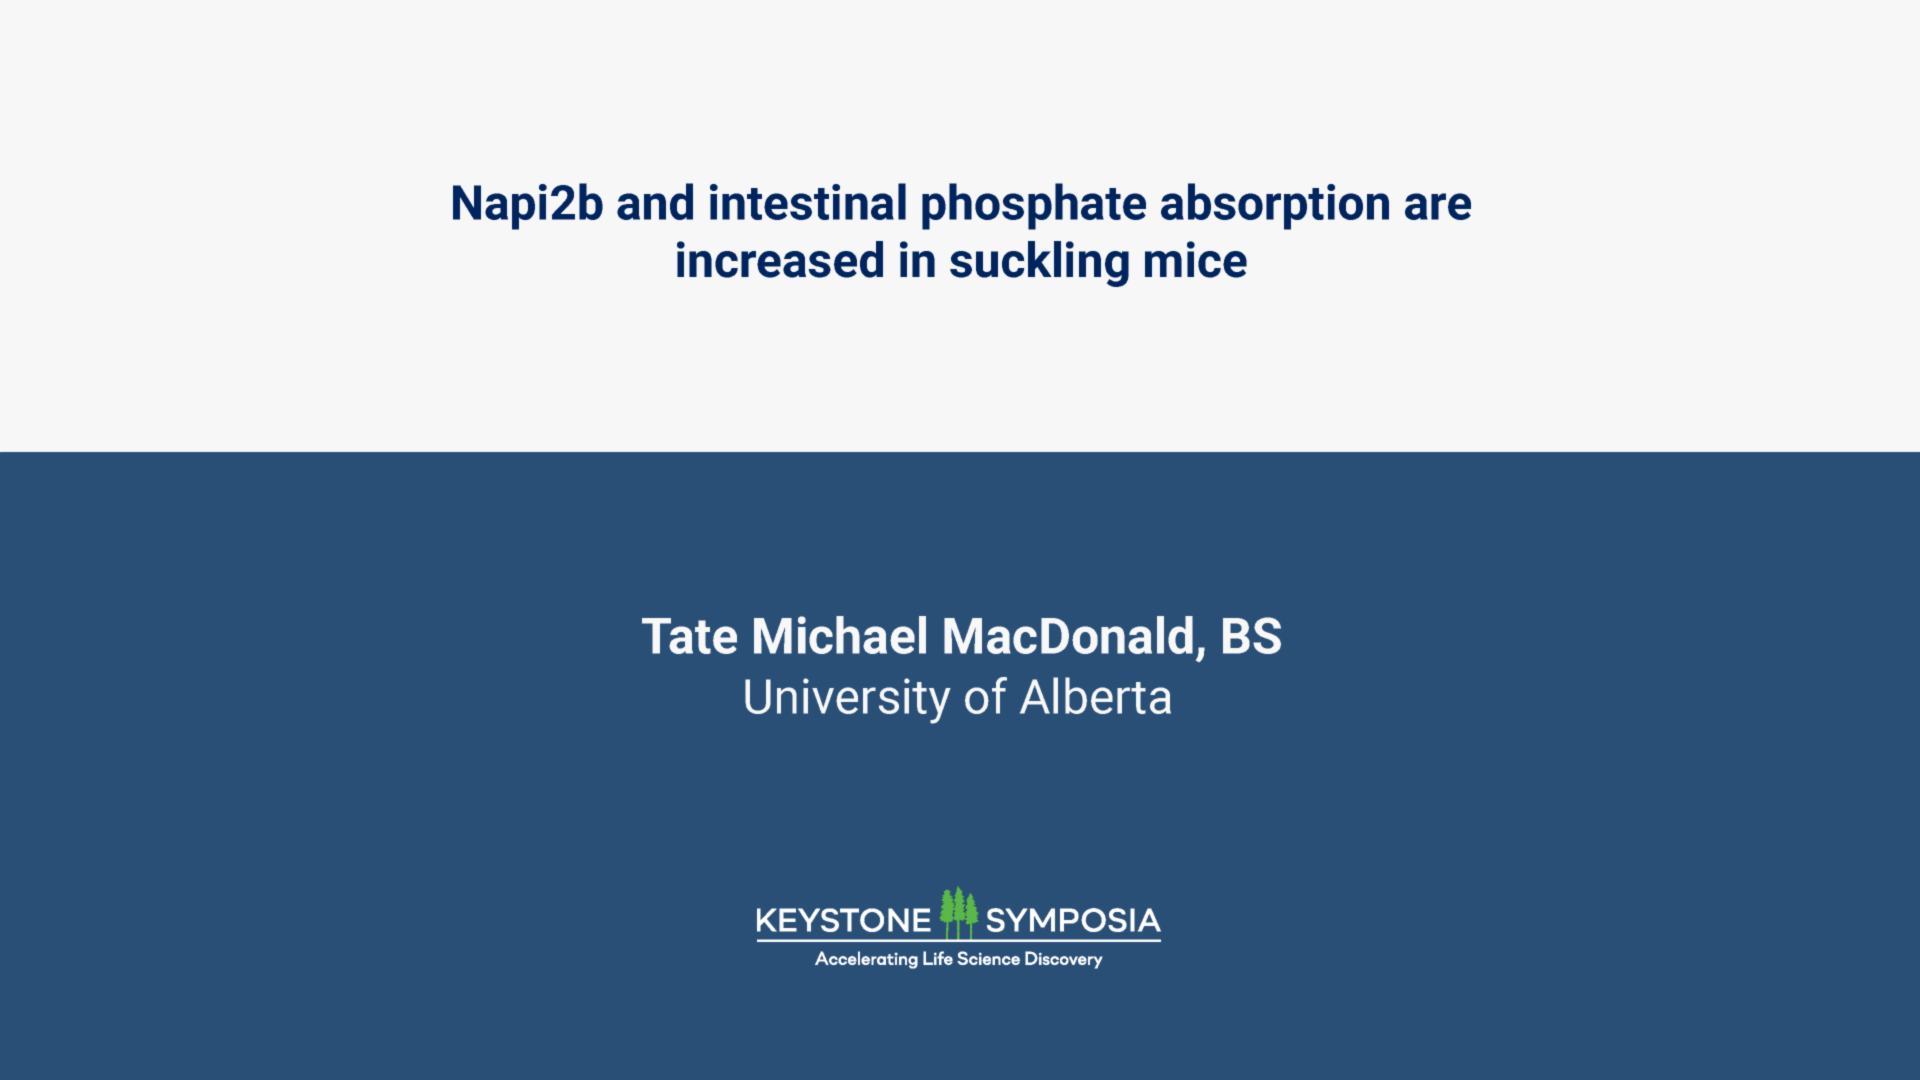 Young mice have increased transcellular intestinal phosphate absorption and increased NaPiIIb expression icon